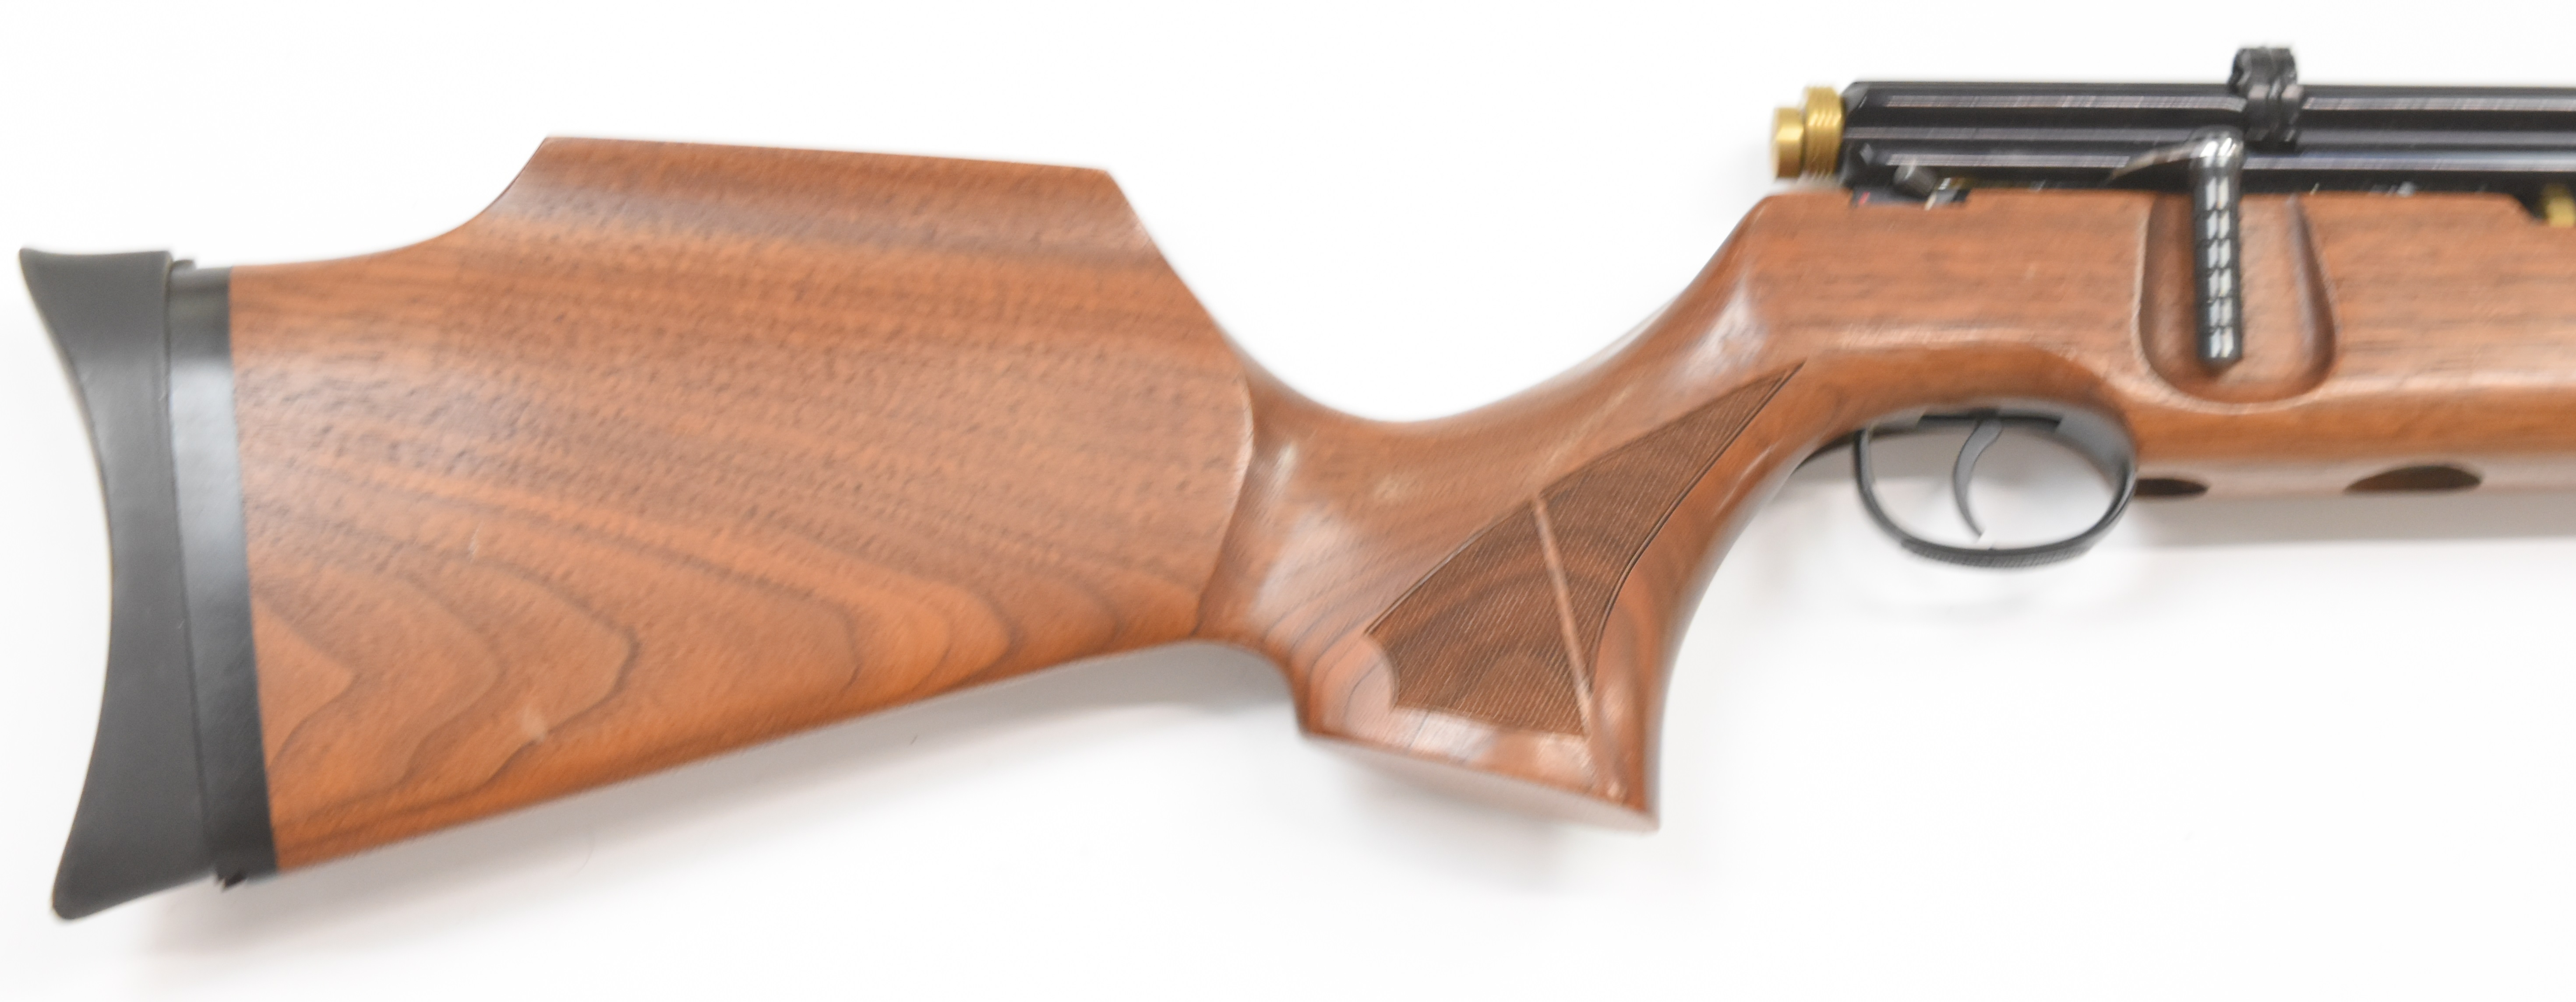 FX Cyclone .22 FAC PCP air rifle with textured semi-pistol grip and forend, raised cheek piece, - Image 3 of 10